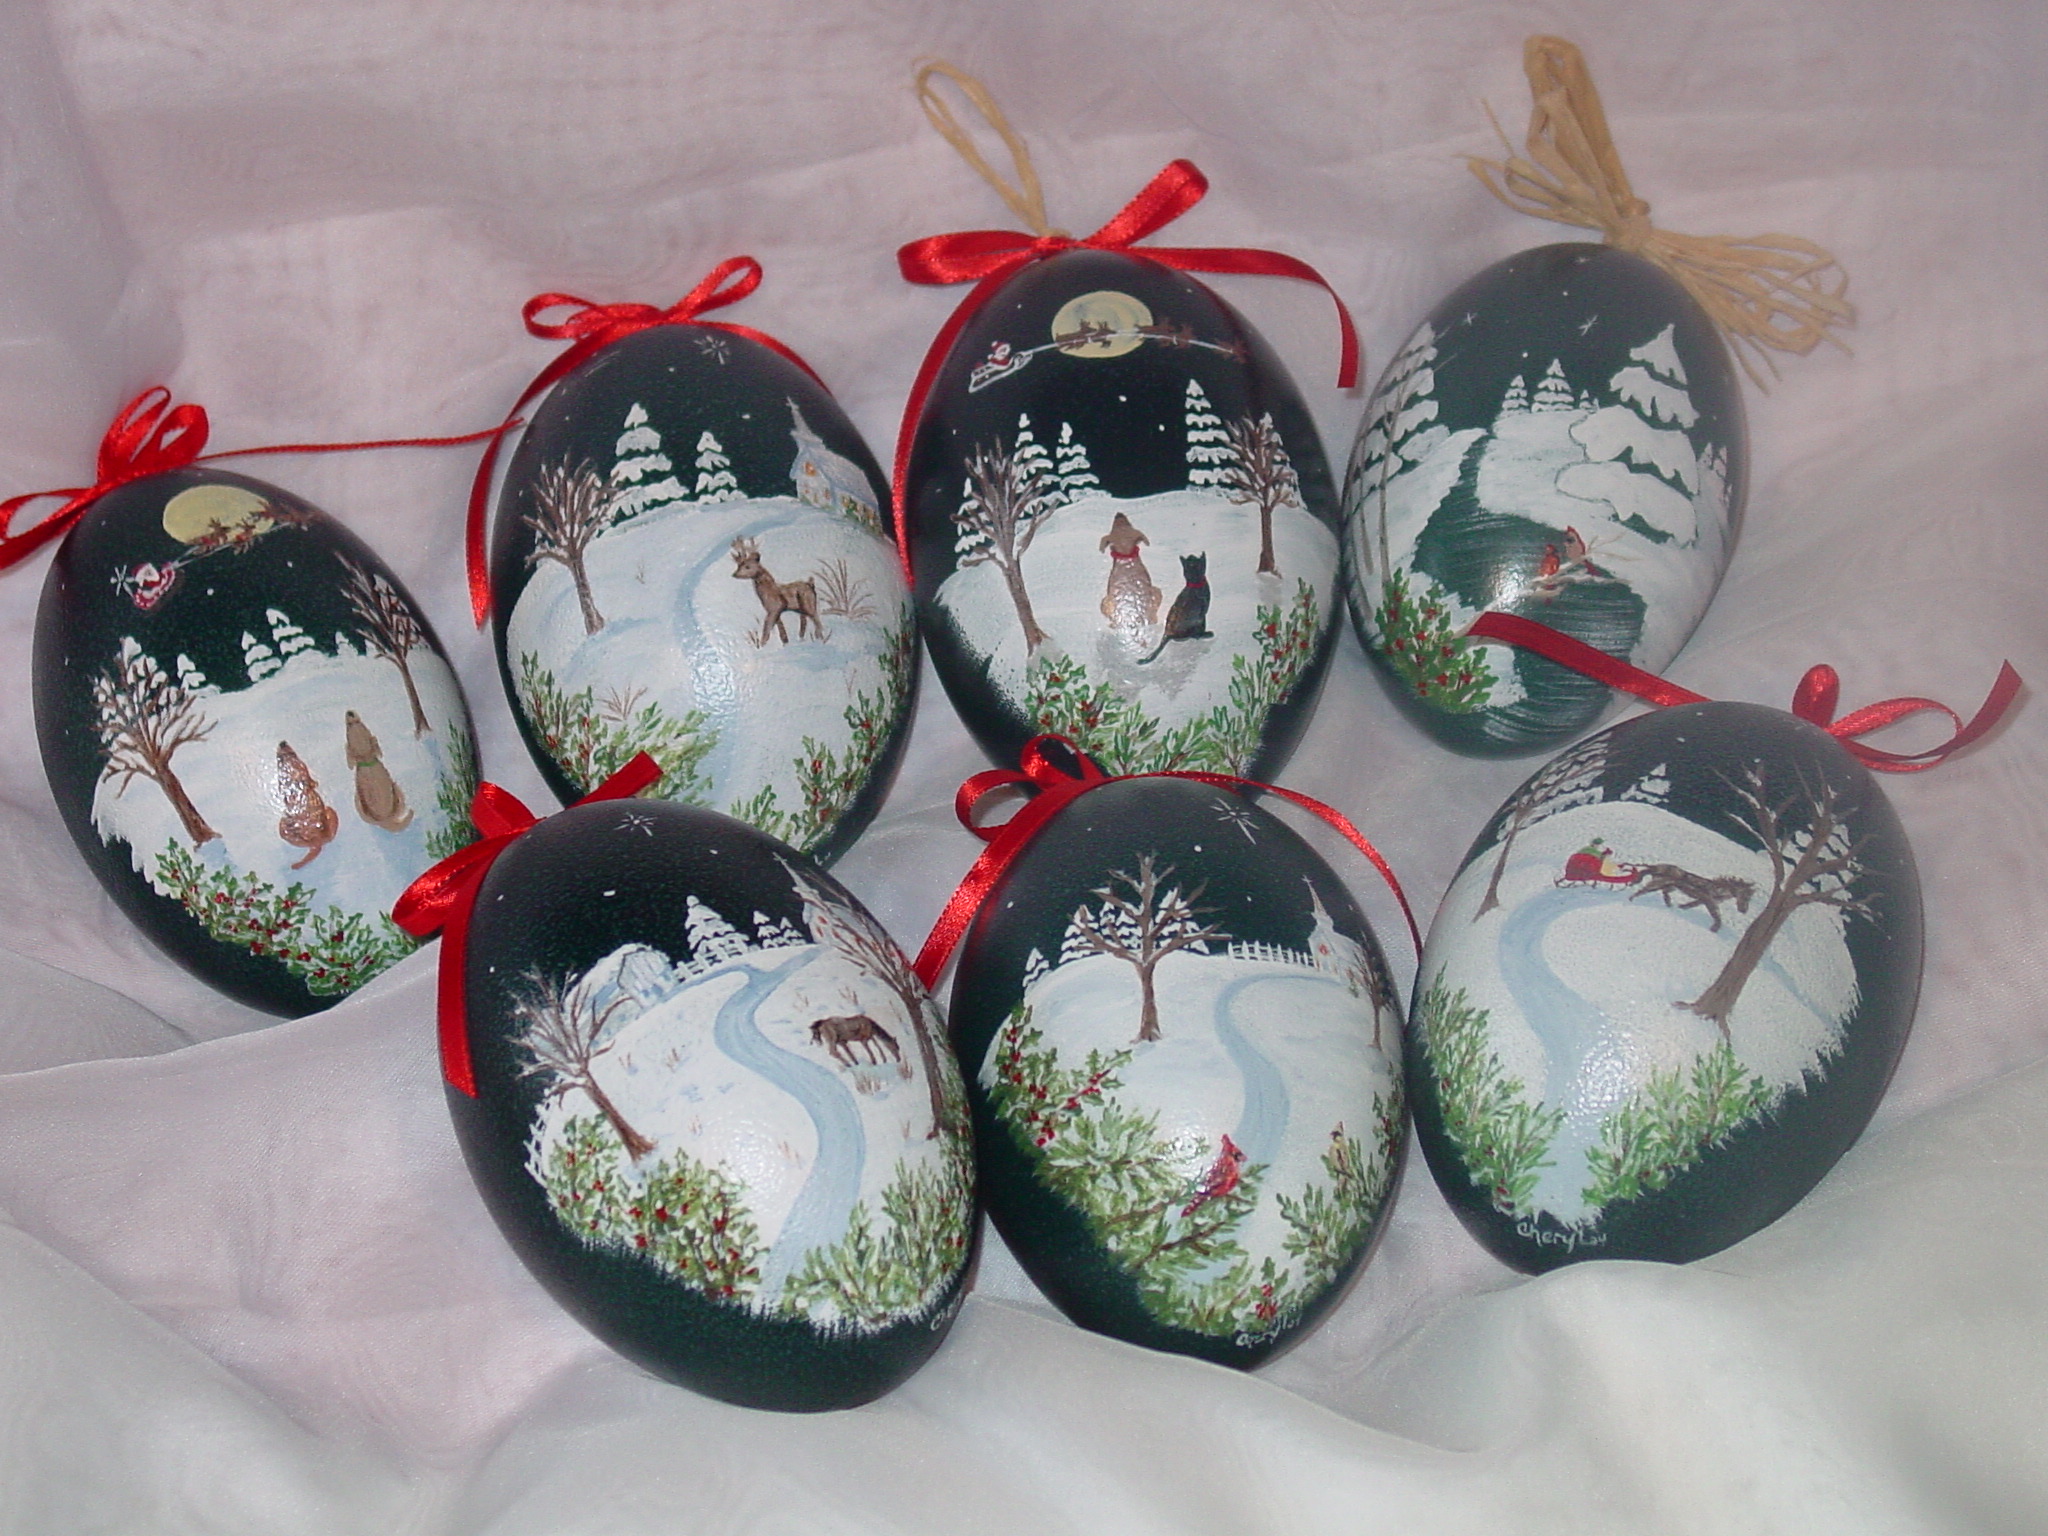 Holiday Painted Emu Eggs - Emu eggs are these lovely blue-green color. The hand paintings are covered with shellac to preserve the paintings for years to come, so they can be displayed each holiday season.